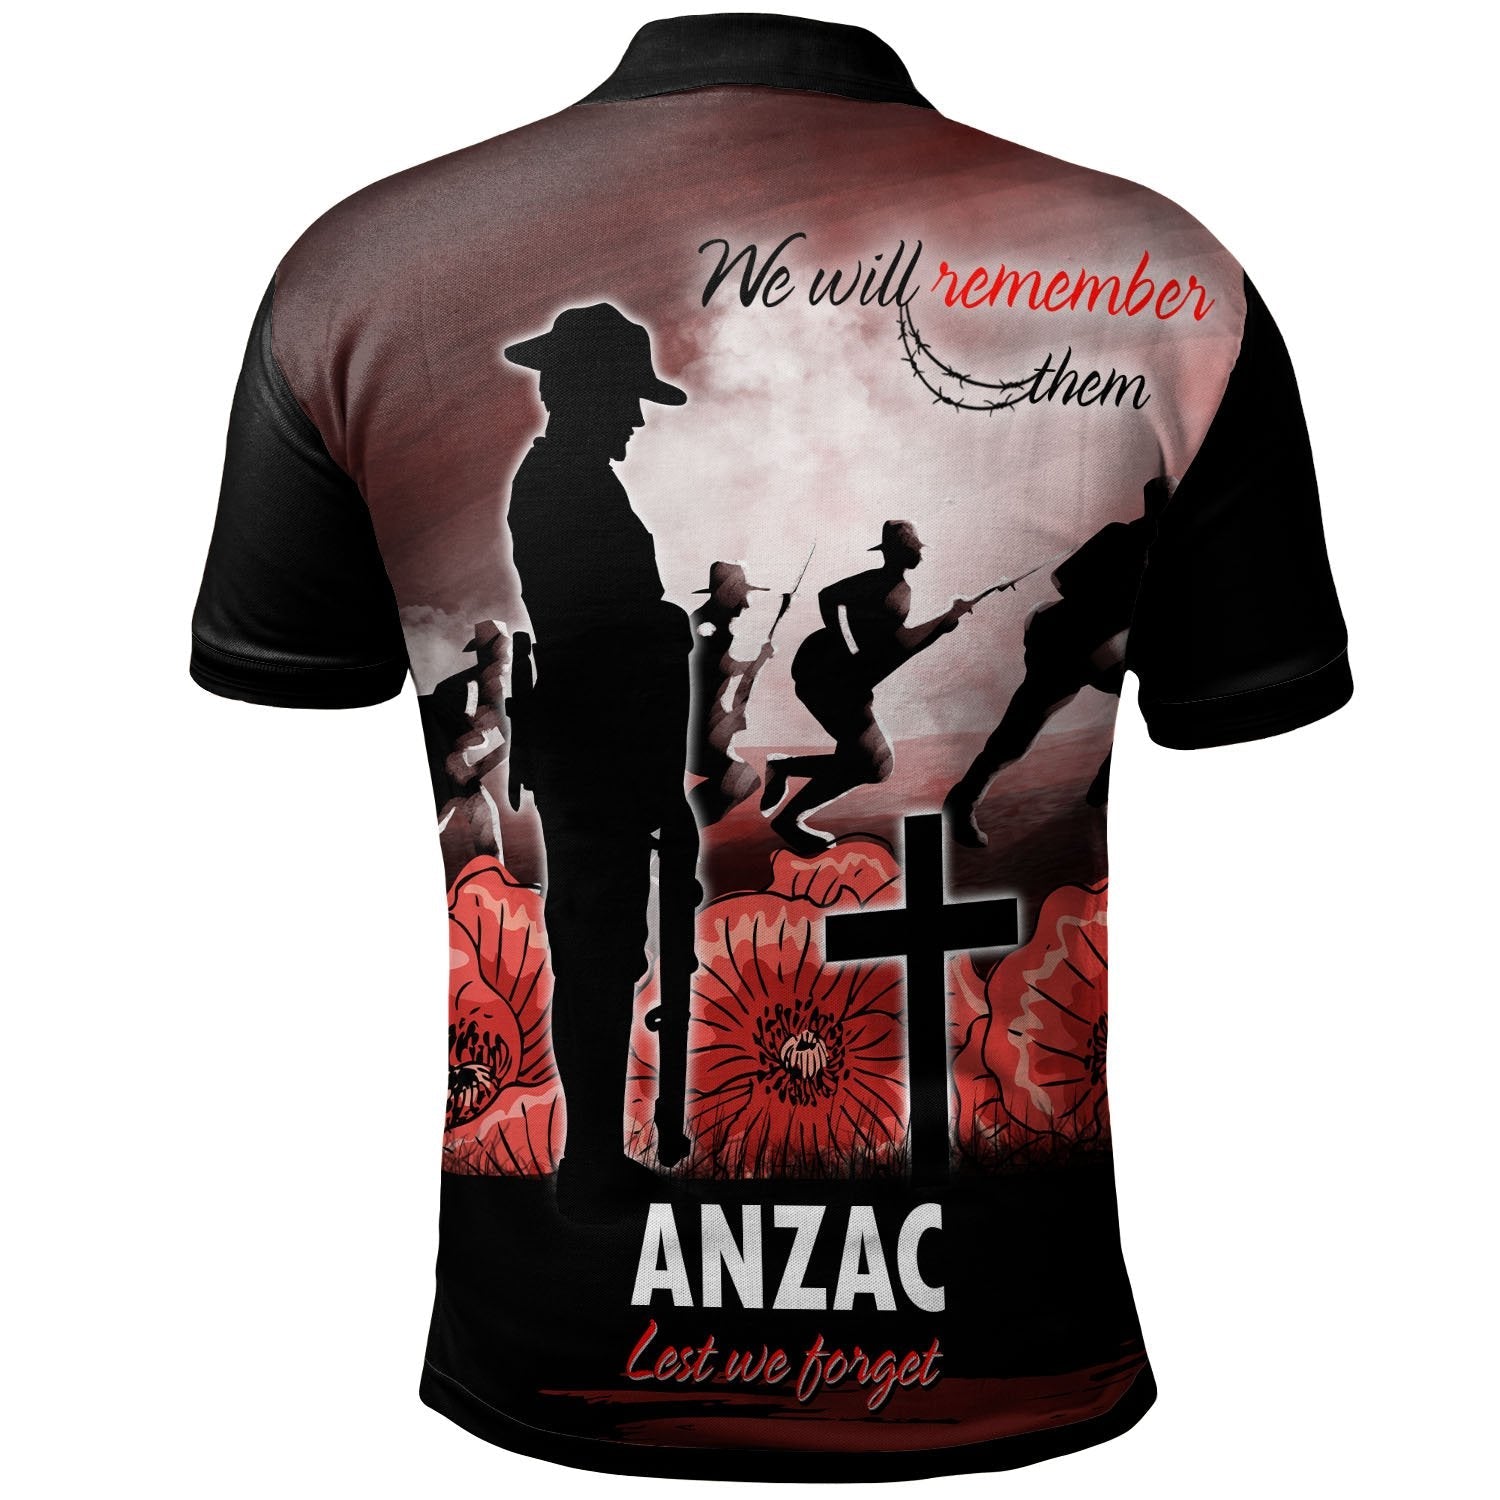 anzac-day-polo-shirt-we-will-remember-them-special-version